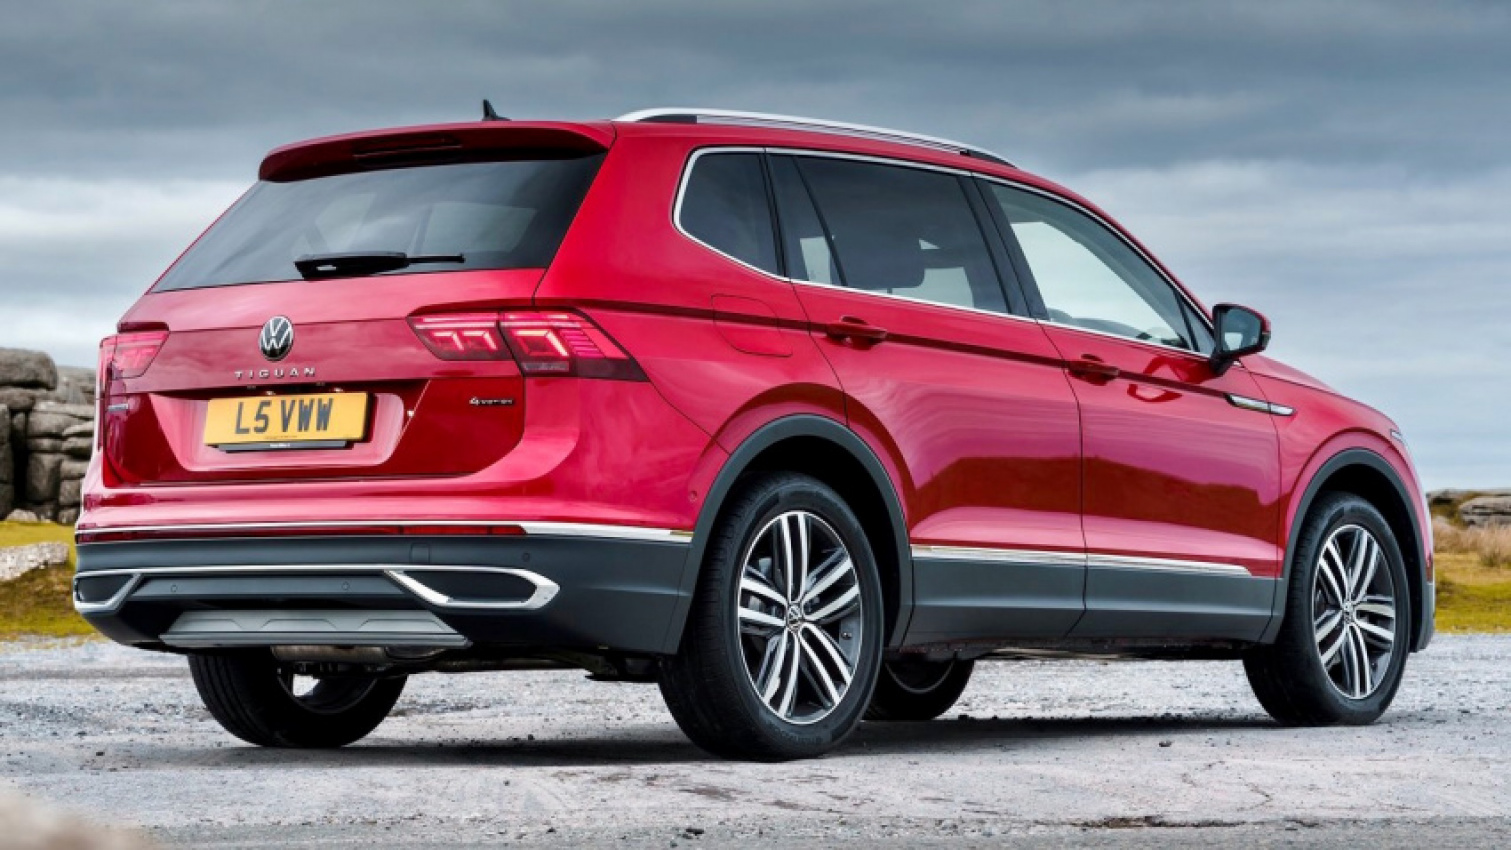 android, autos, cars, volkswagen, all-wheel drive, auto, mid-size suv, petrol, seven seats, tiguan allspace, turbo, volkswagen tiguan, android, 2022 volkswagen tiguan allspace: a new look suv